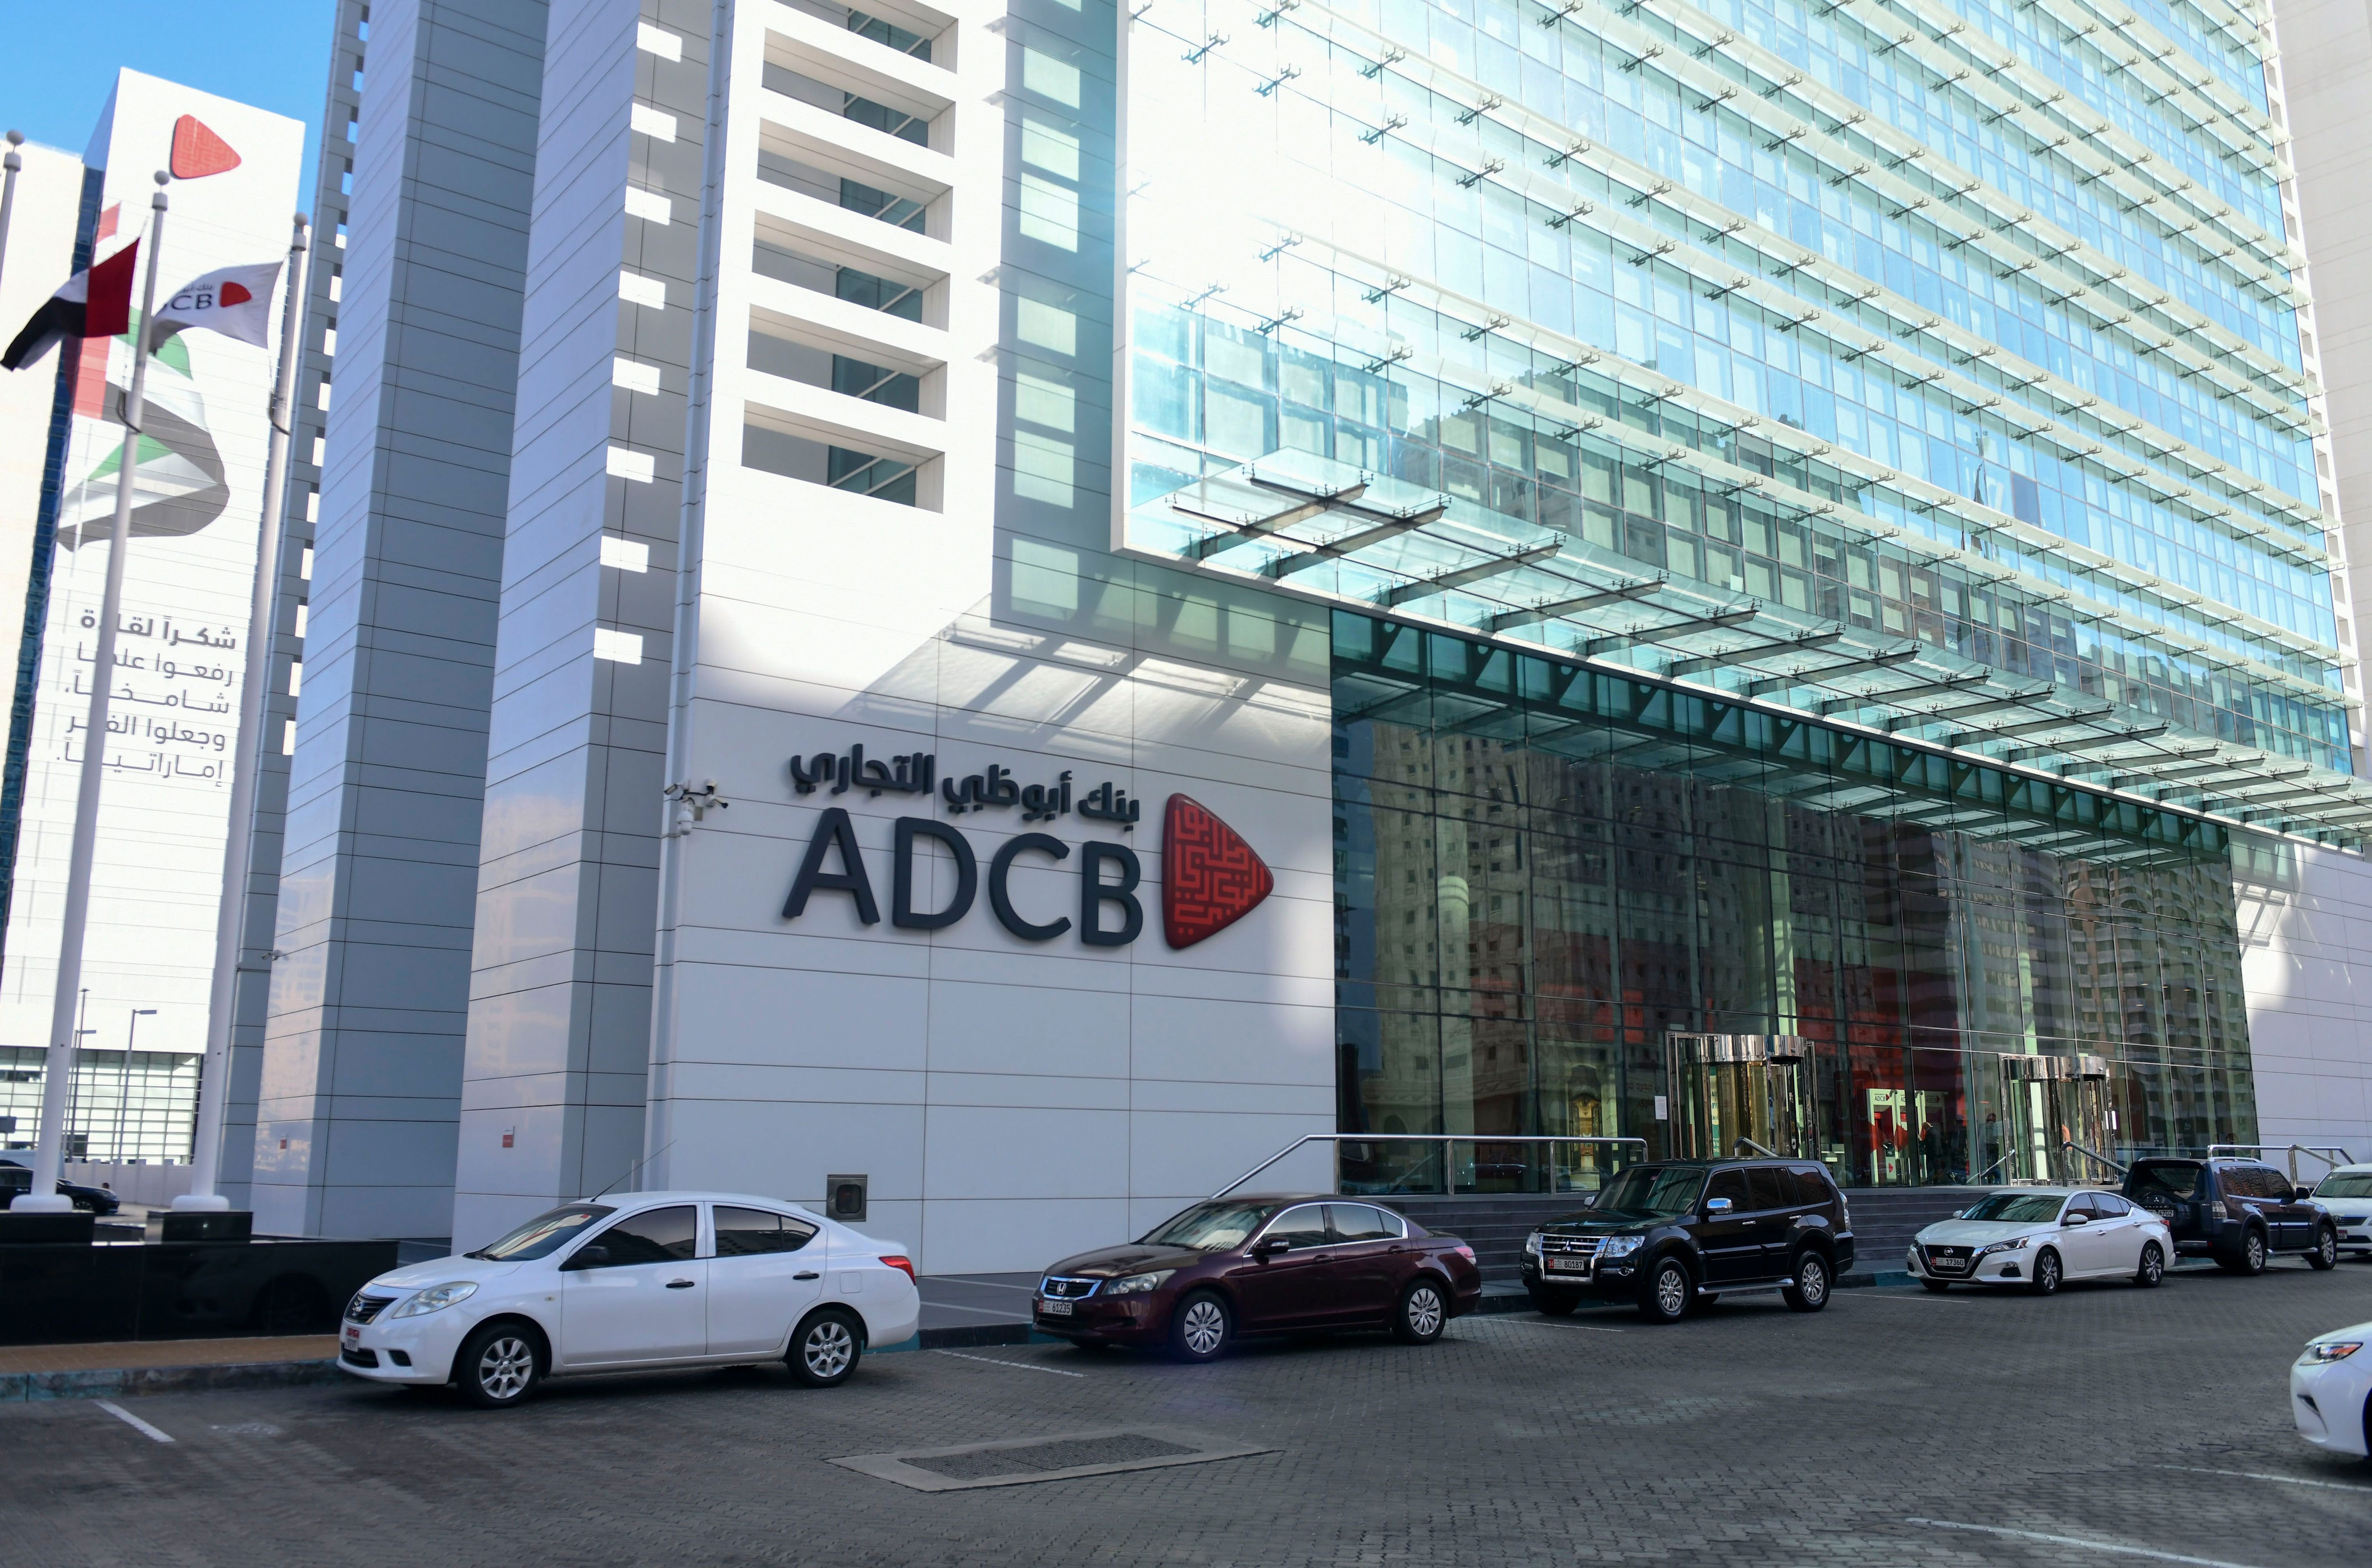 adcb reports 38% jump in fourth-quarter profit on higher interest income